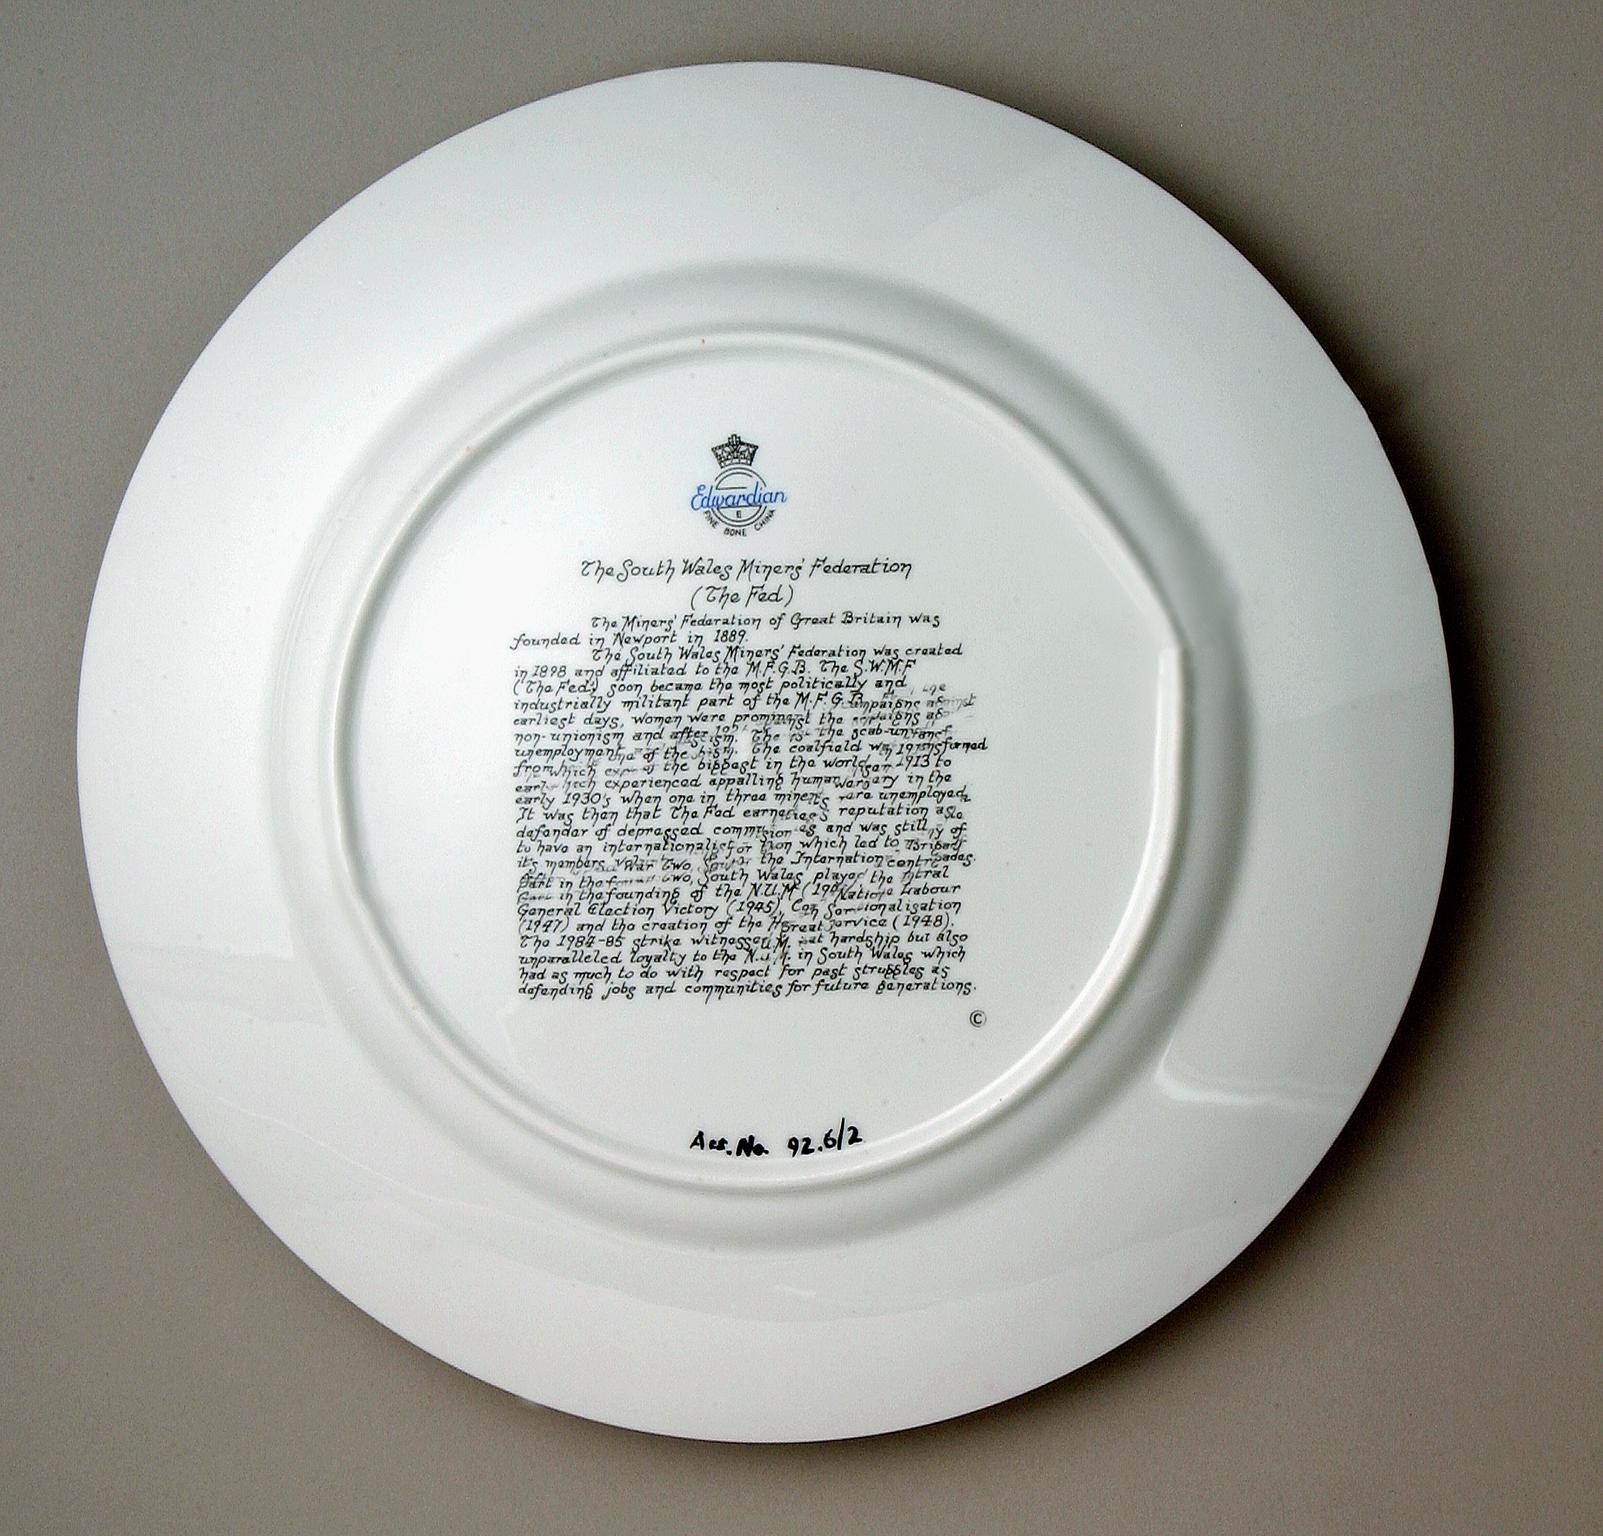 South Wales Miners' Federation, plate